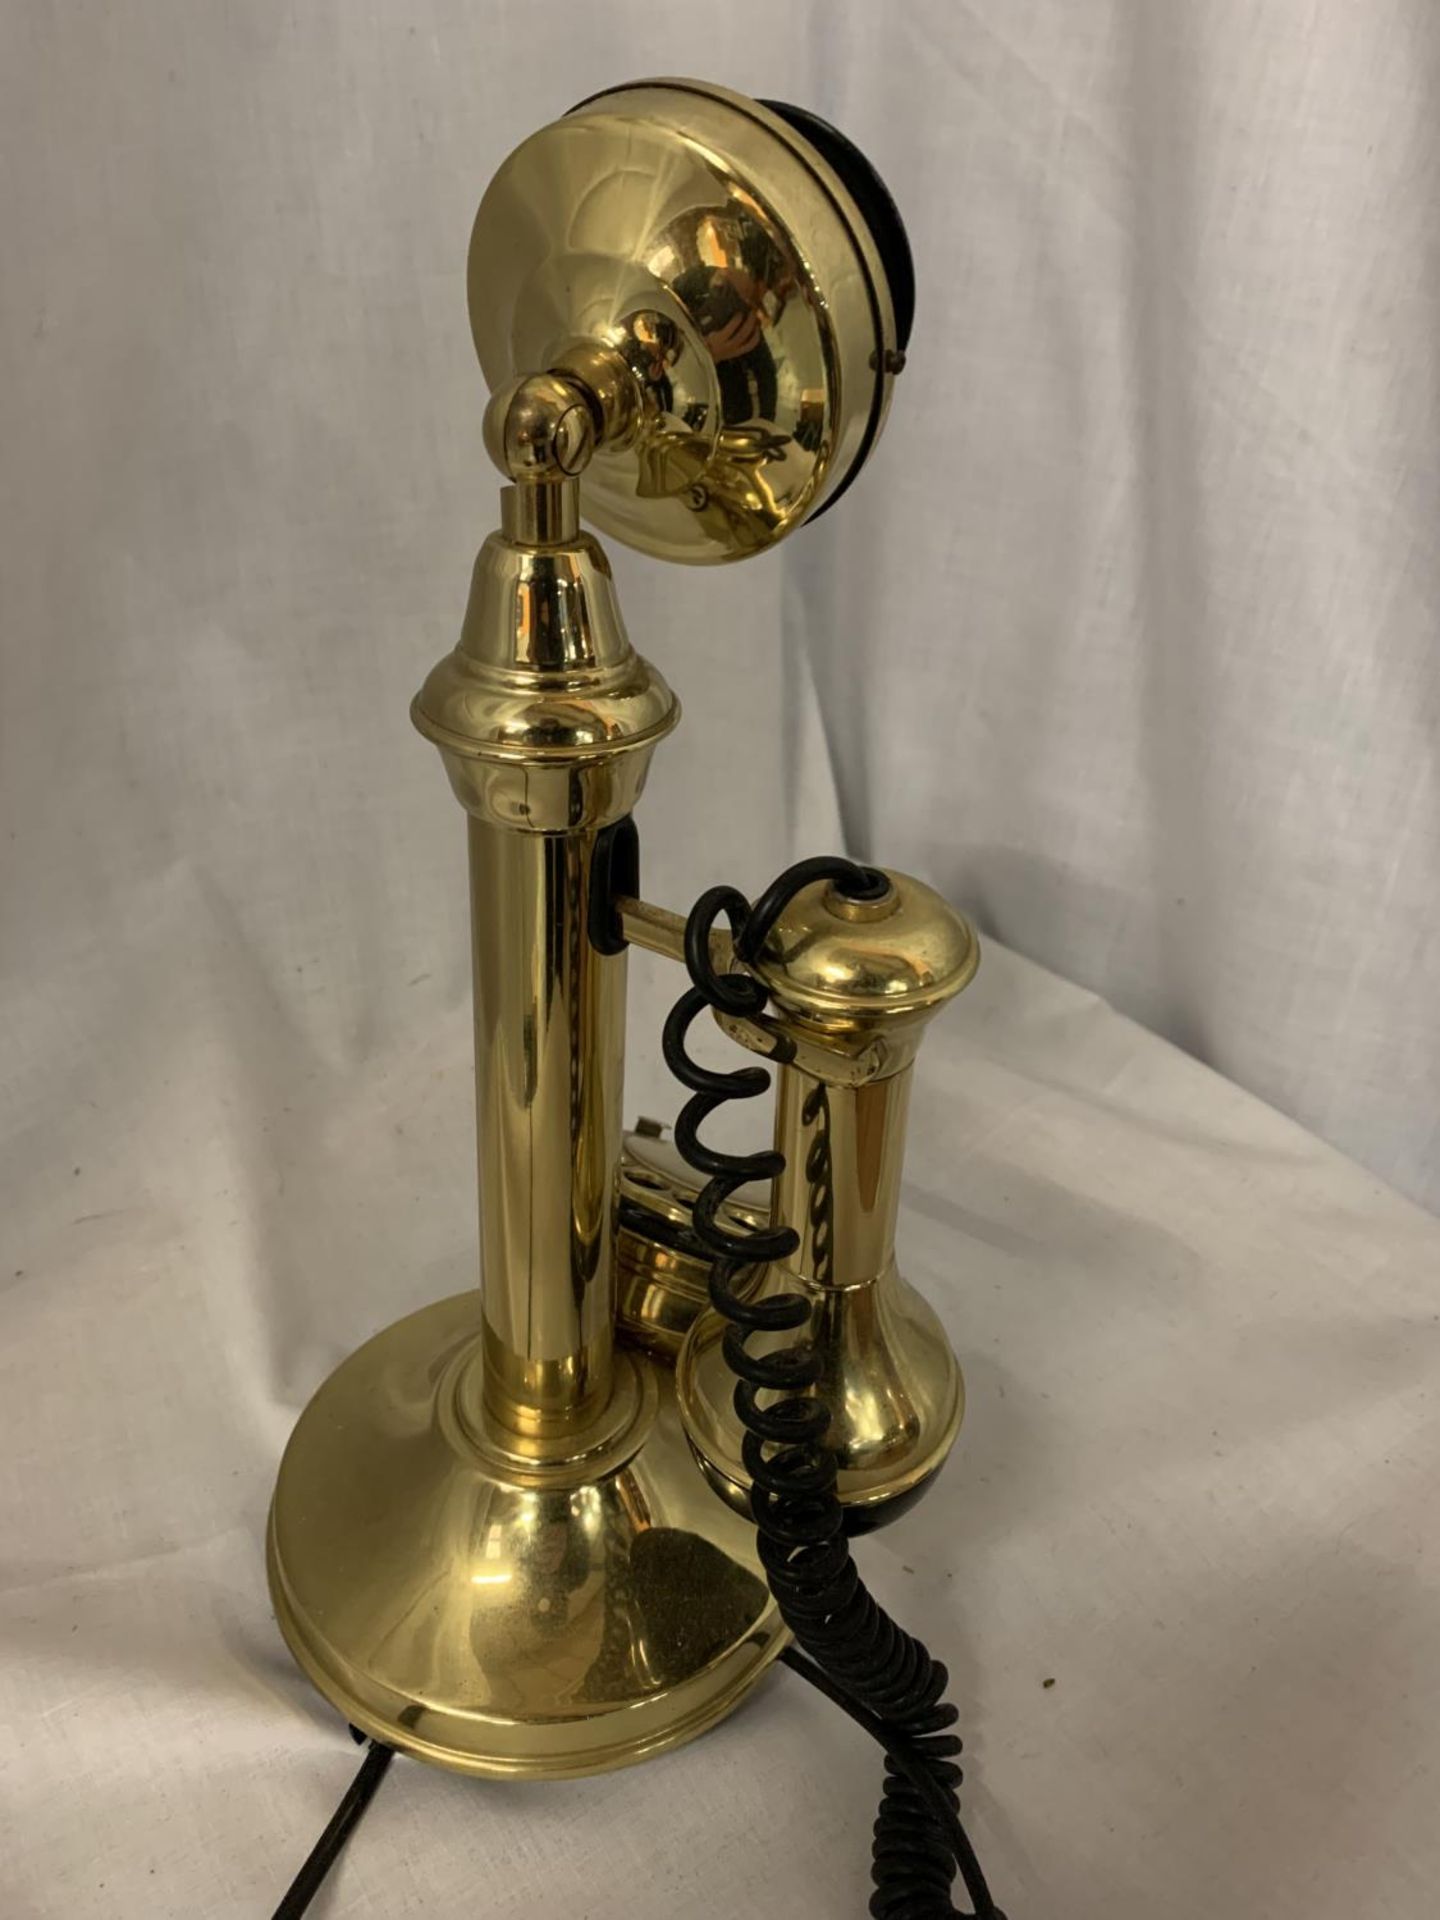 A BRASS VINTAGE STYLE TELEPHONE - Image 3 of 4